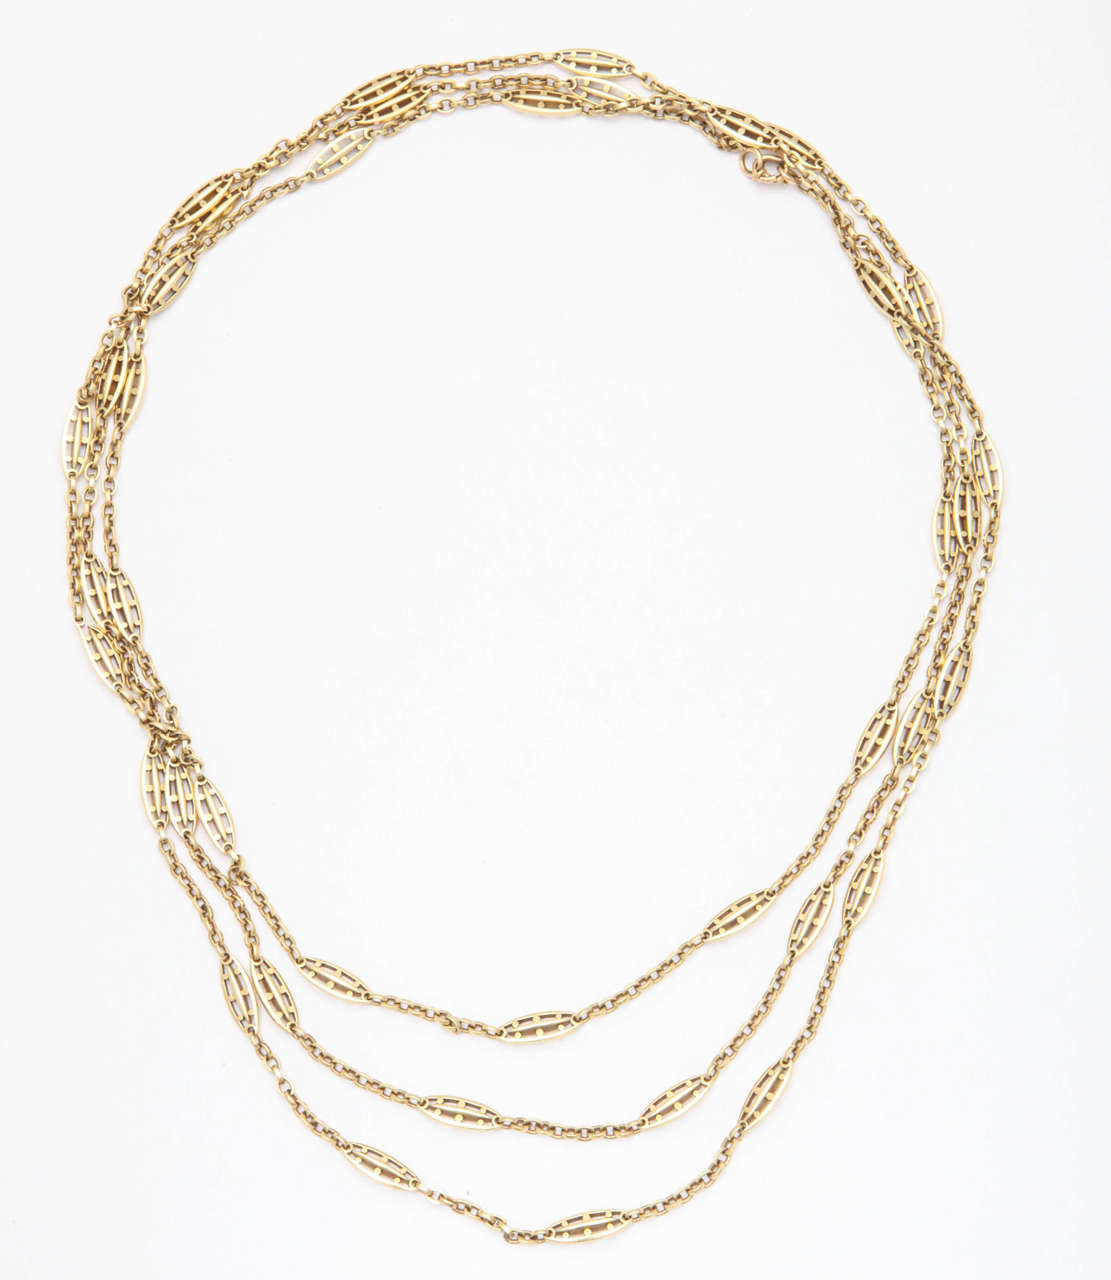 Antique Handmade Sautoir Chain - which can be doubled or tripled.